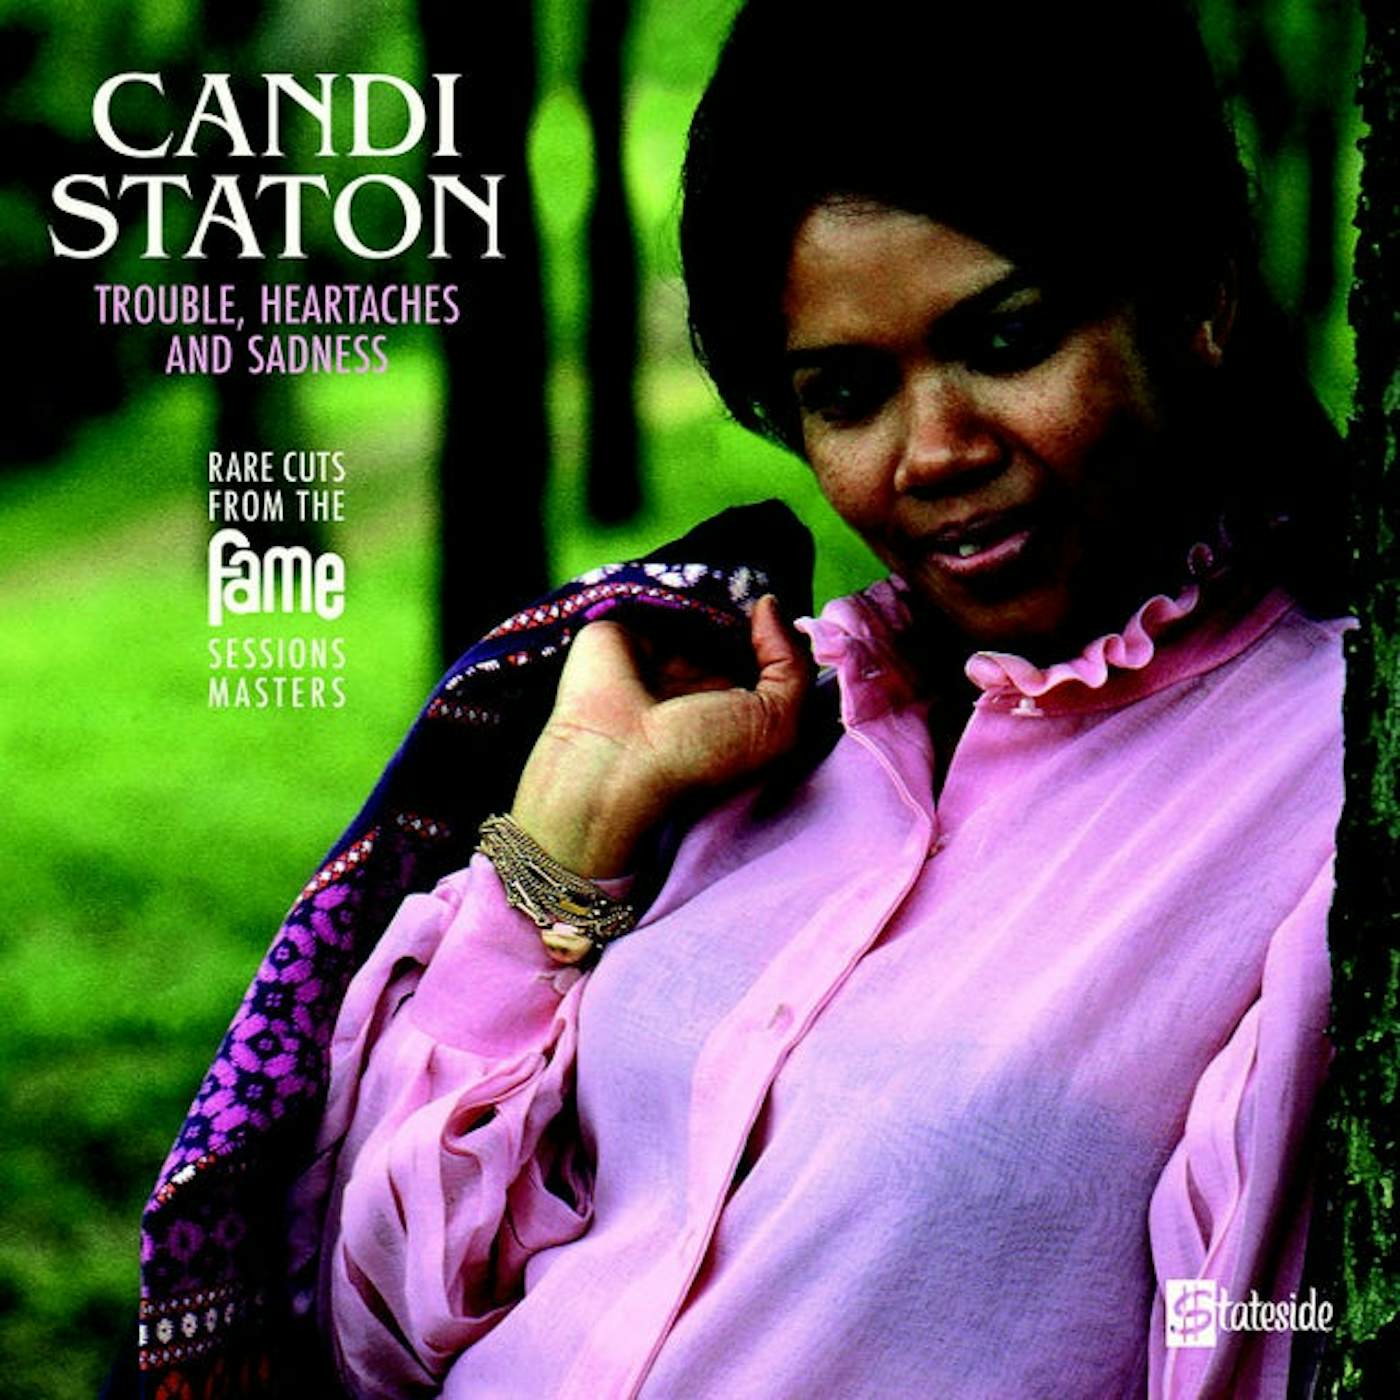 Candi Staton TROUBLE, HEARTACHES & SADNESS (THE LOST FAME SESSIONS MASTERS) (RSD) Vinyl Record